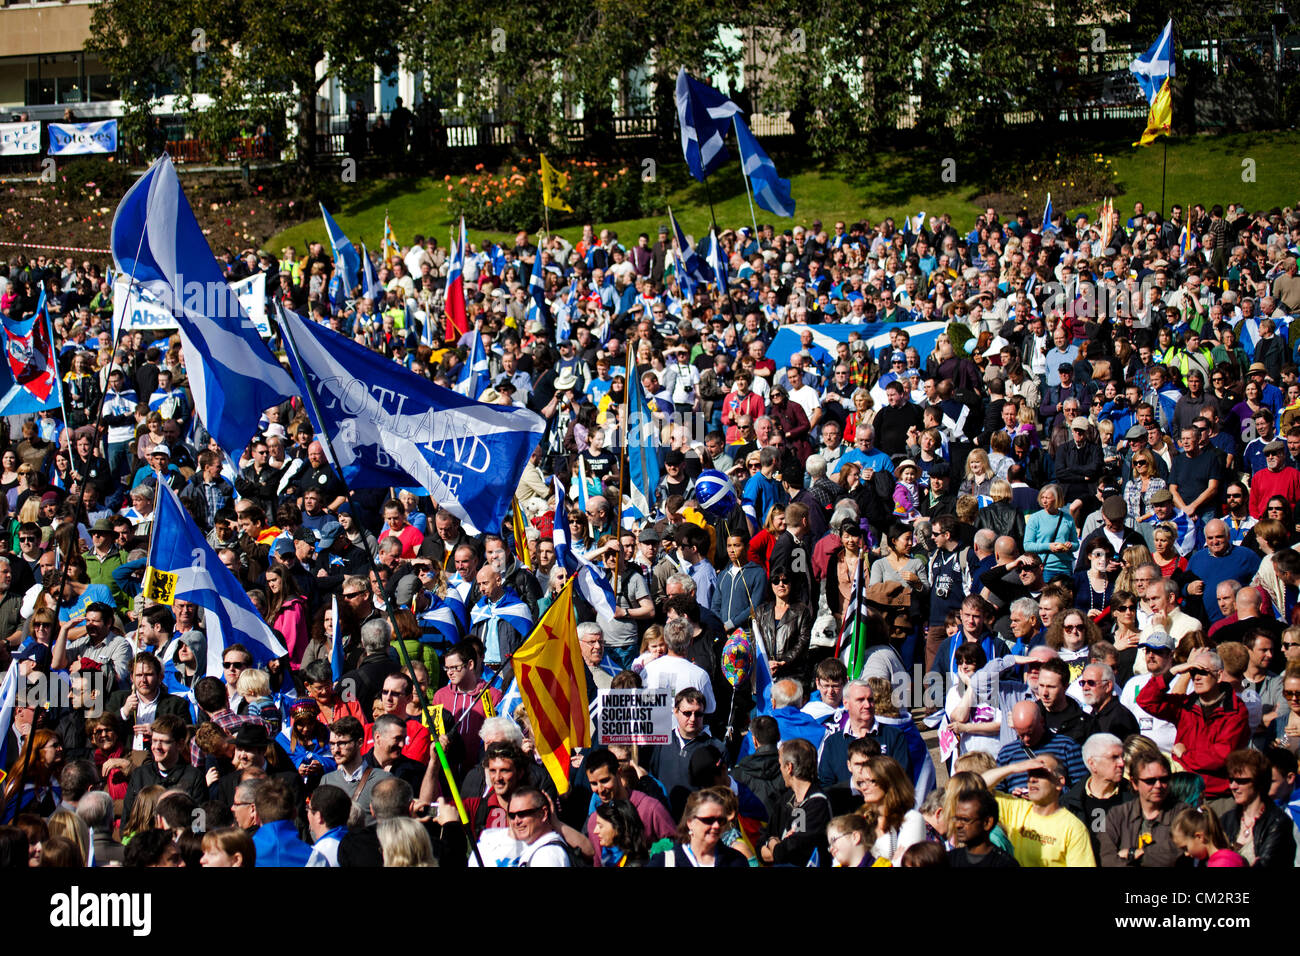 22 September 2012, Edinburgh, an estimated Five Thousand people took part in an event in the city aimed at  demonstrating support for independence.  Both young and old waving saltires and lion rampant flags gathered in the Meadows  before marching to Princes Street Gardens.  The rally was staged under the banner Independence for Scotland and is not part of the official Yes Scotland campaign. Stock Photo